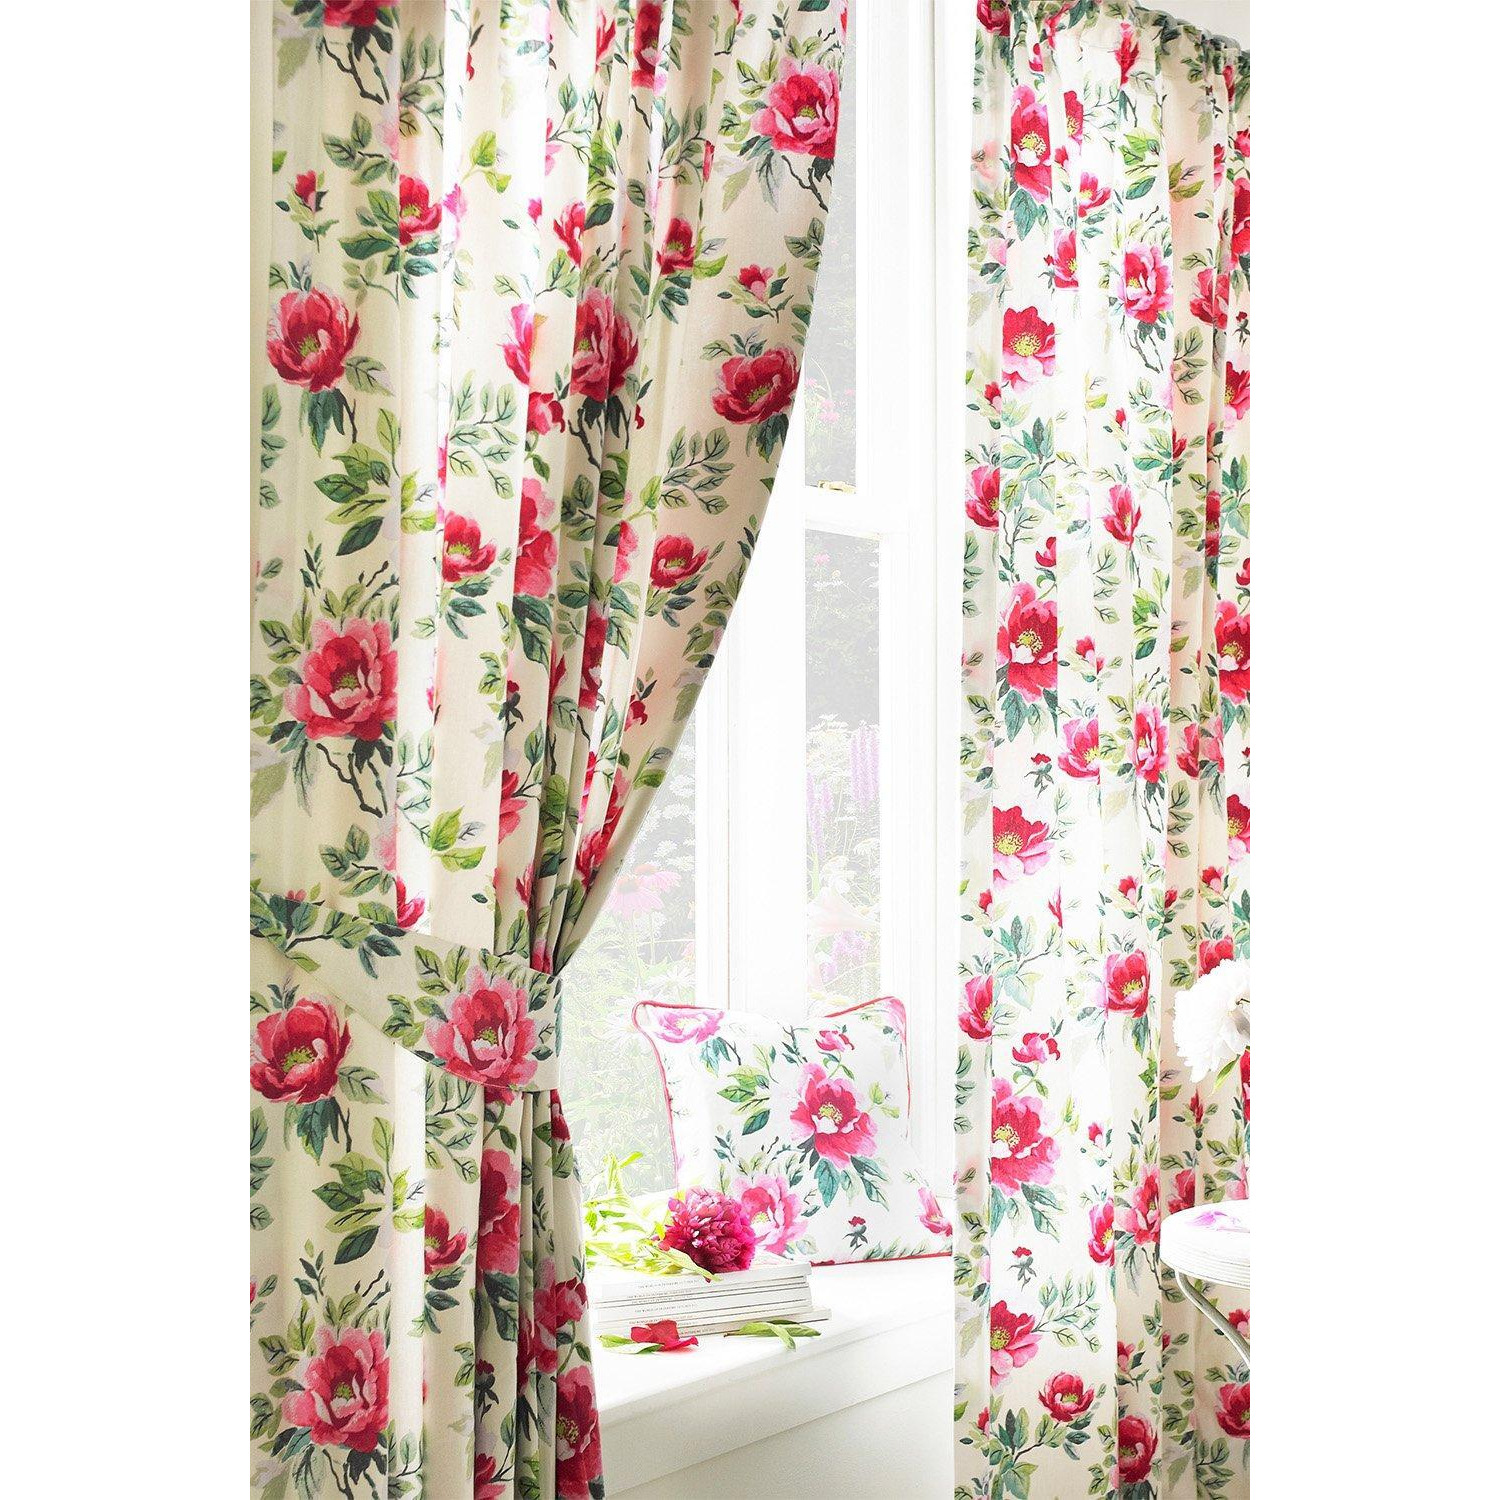 Peony Country Floral Pencil Pleat Curtains - image 1